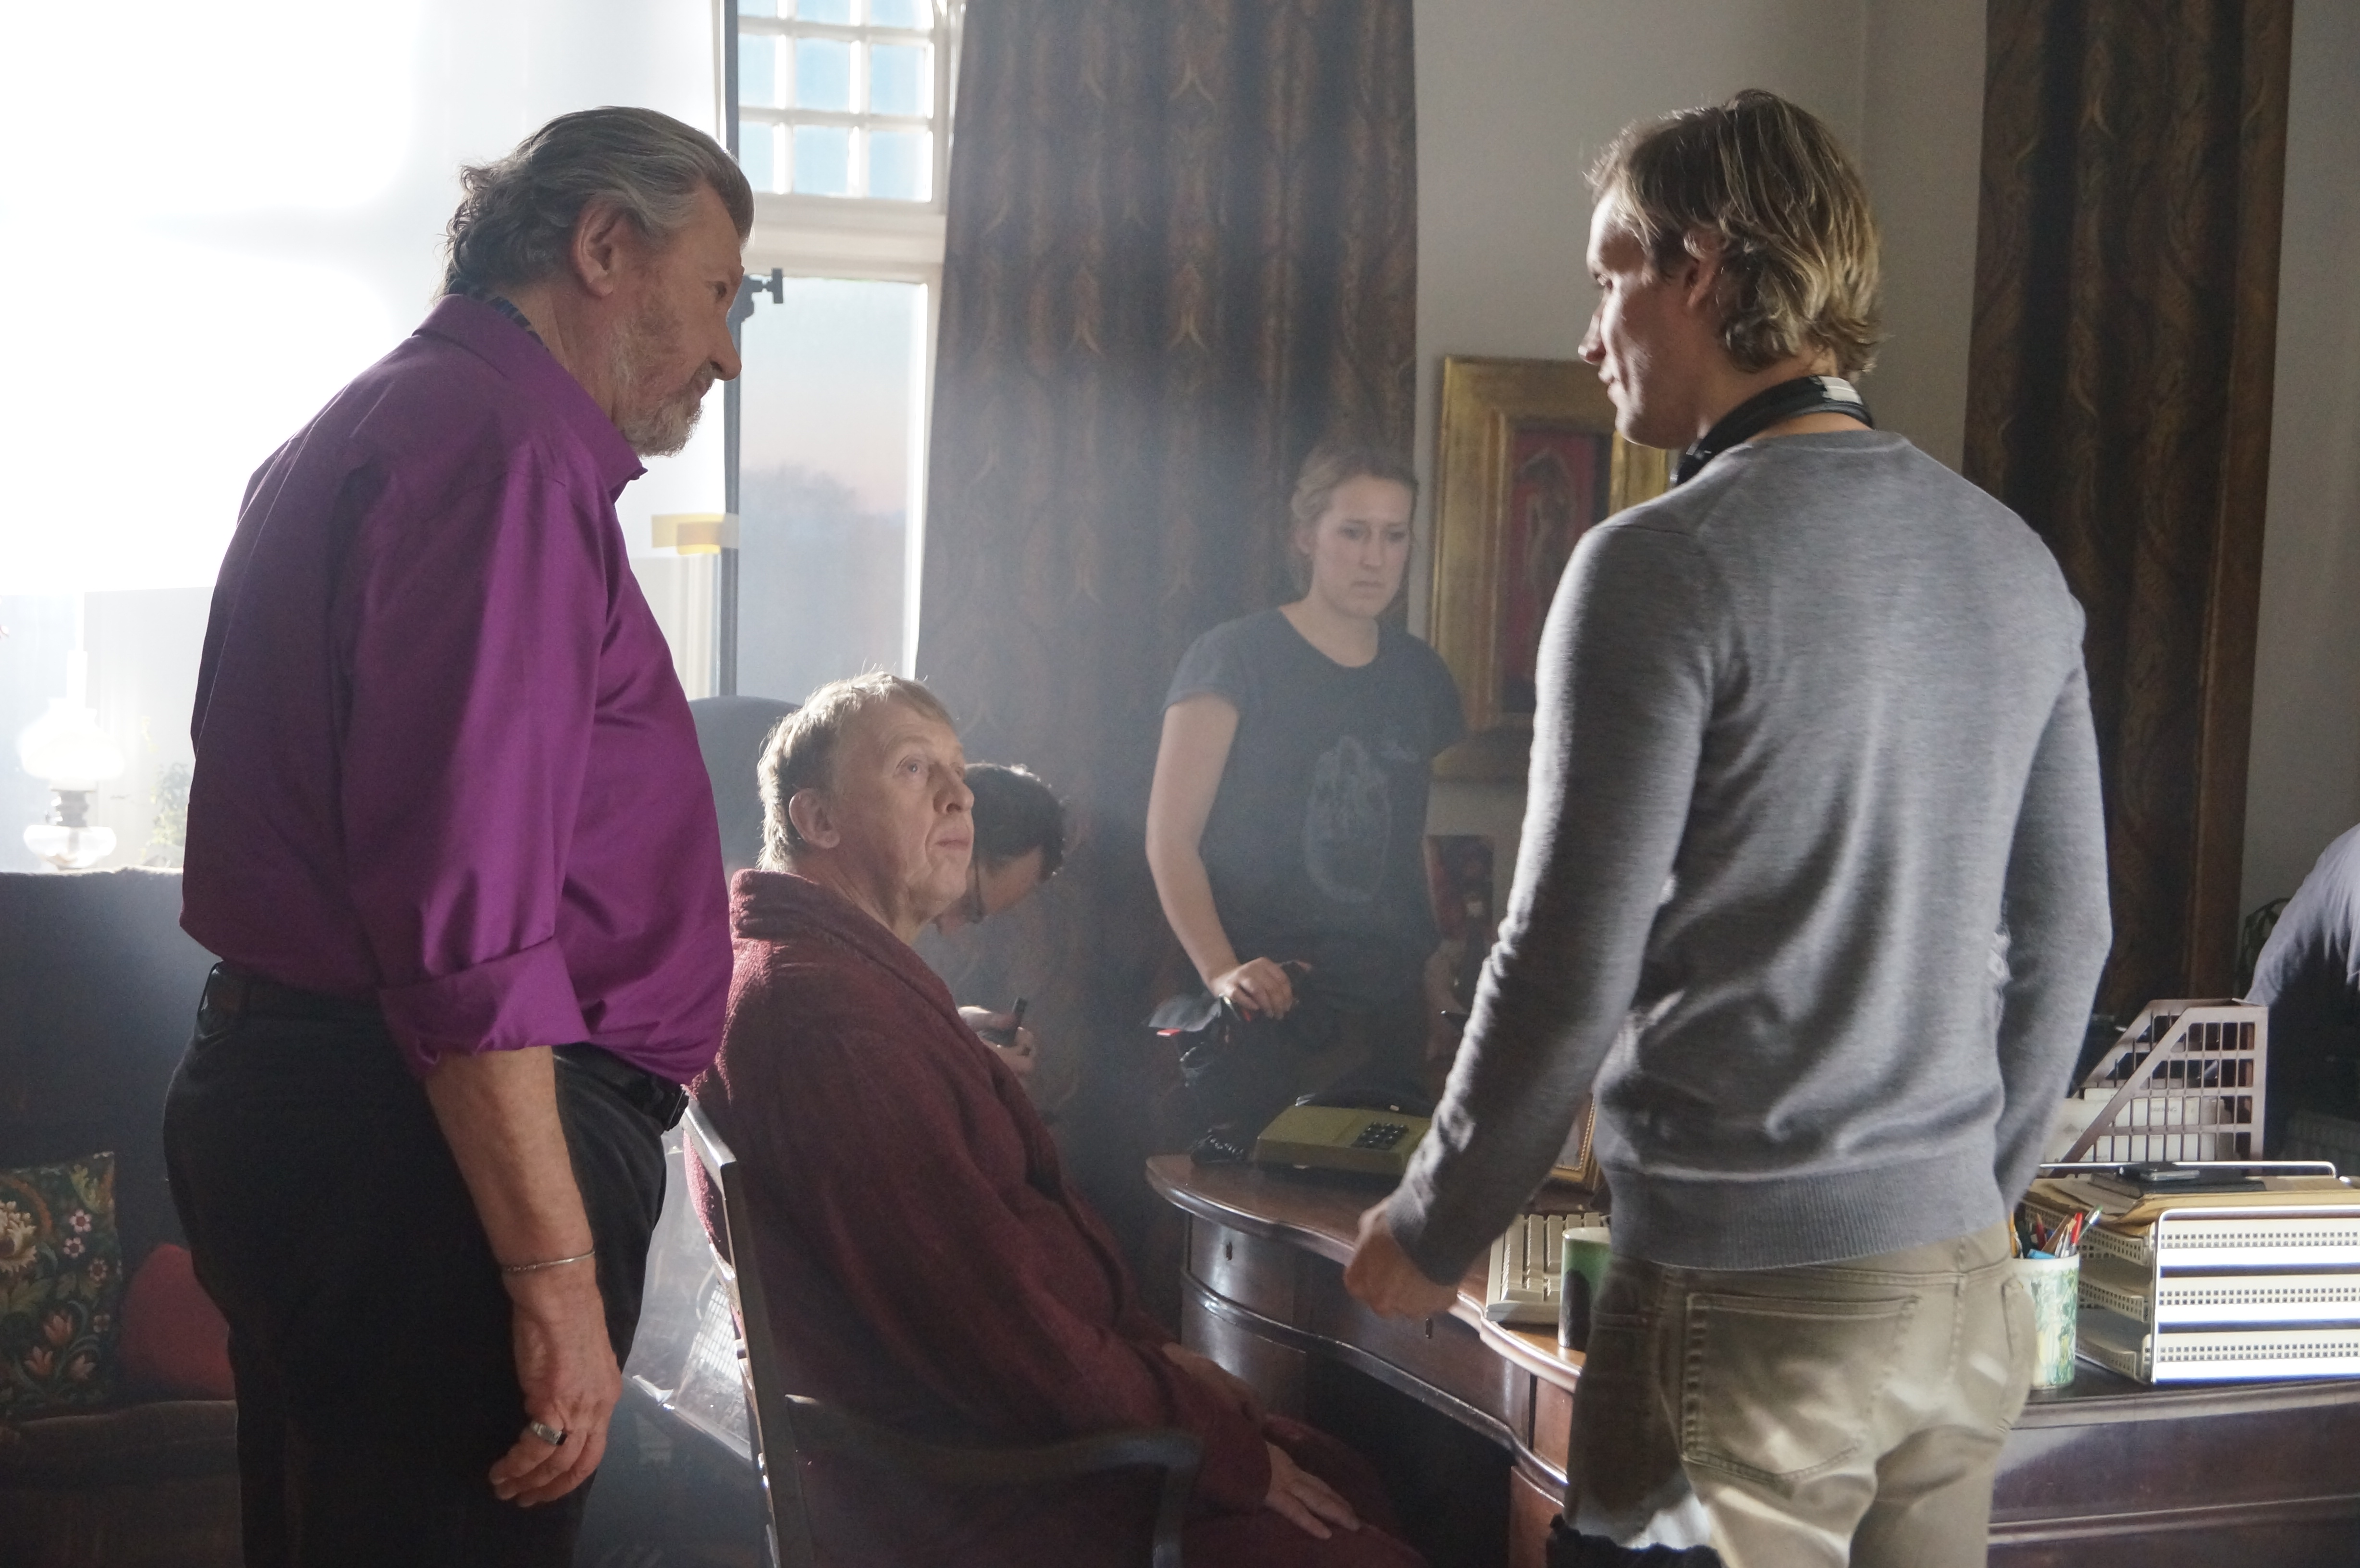 Actors Iwar Wiklander and Tomas von Brömssen being directed by Casper Andreas during the shooting of A LAST FAREWELL, in February 2013.